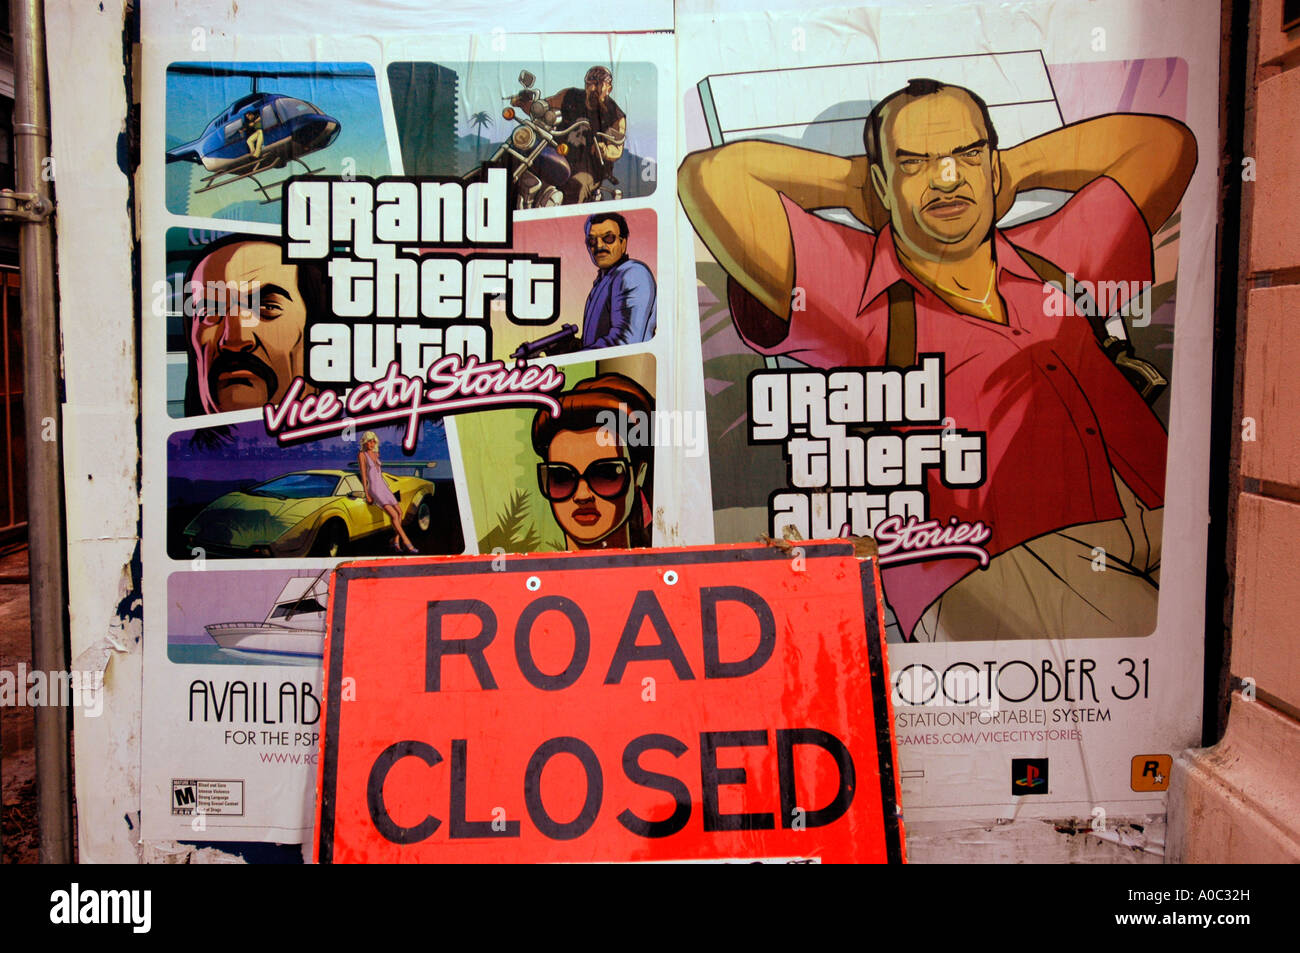 Grand Theft Auto: Vice City - Apps on Google Play